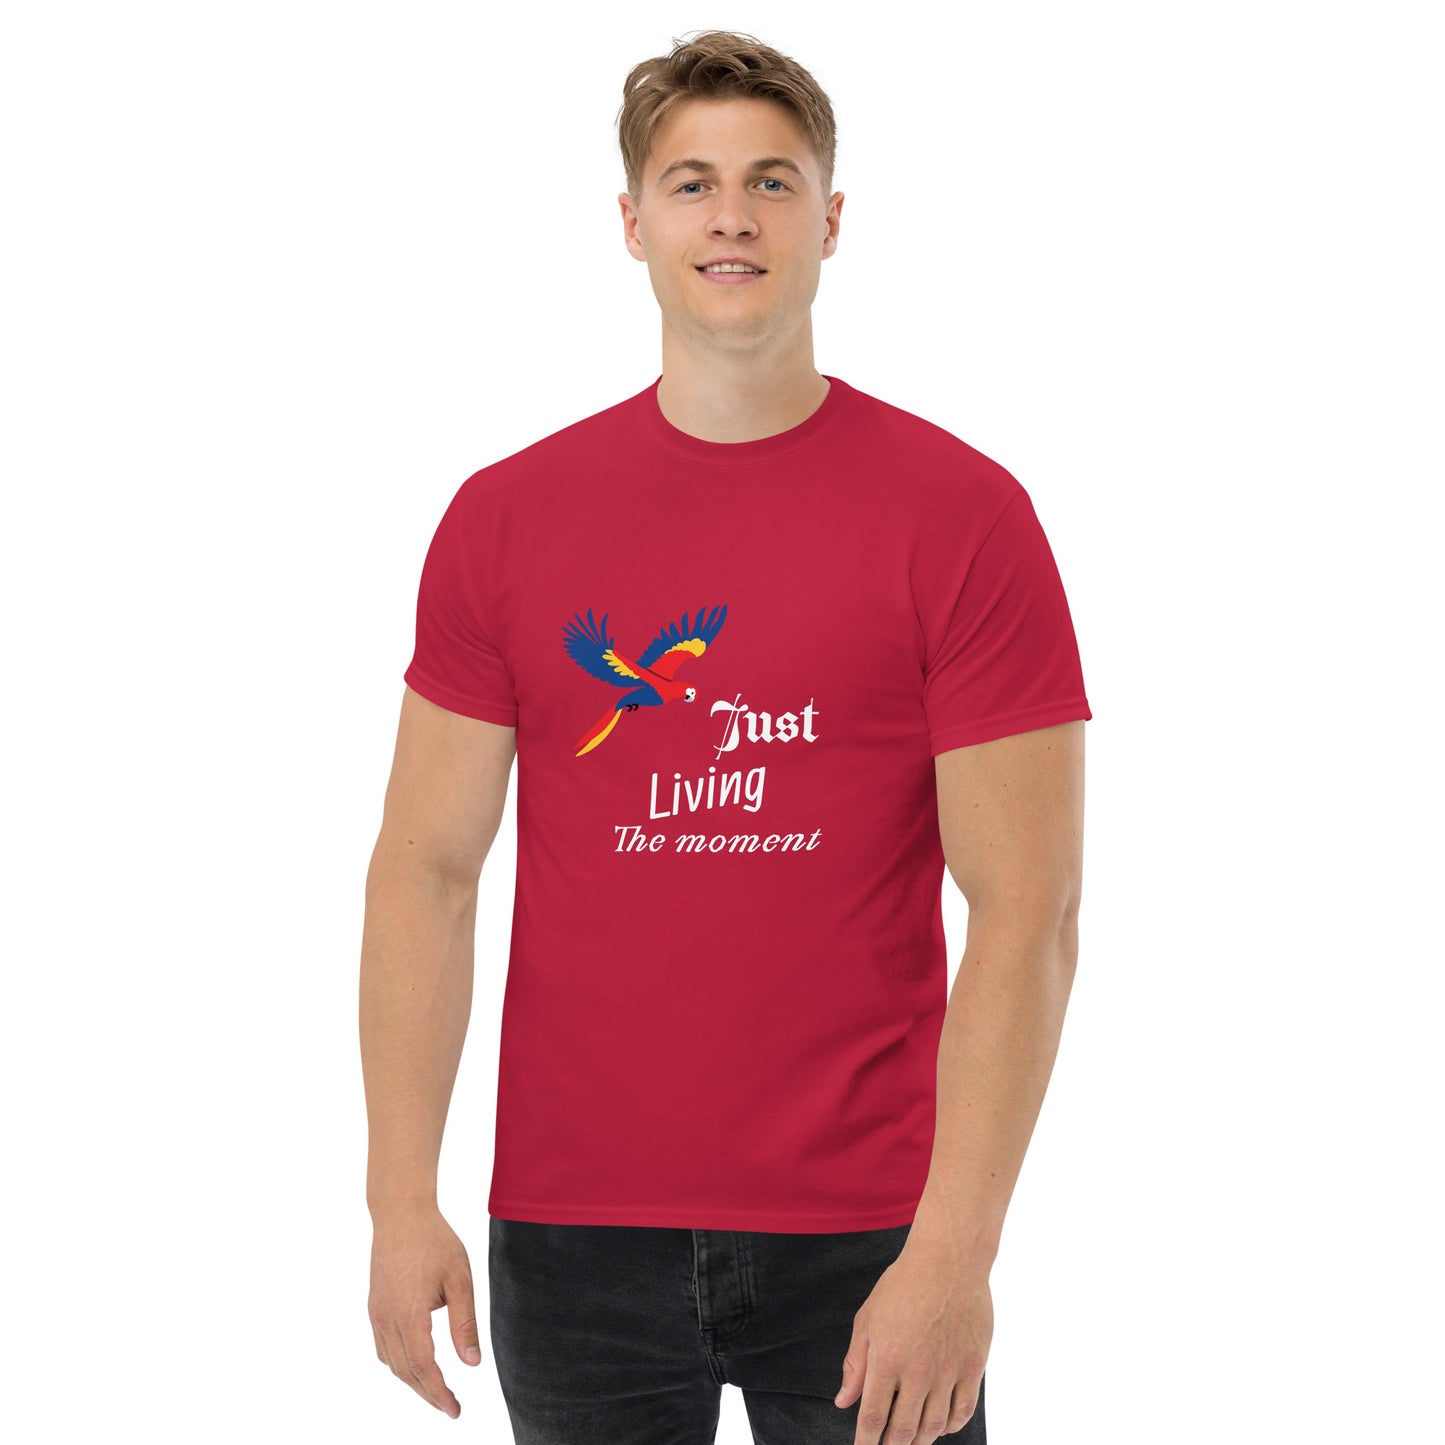 Inspirational  Men's tee, Positive quote: Just Living The Moment" motivational T-shirt, Words Of Wisdom, Motivational Clothes Unique Gift Idea for boy, brother, uncle, professor, grandfather, dad, young man - red t-shirt